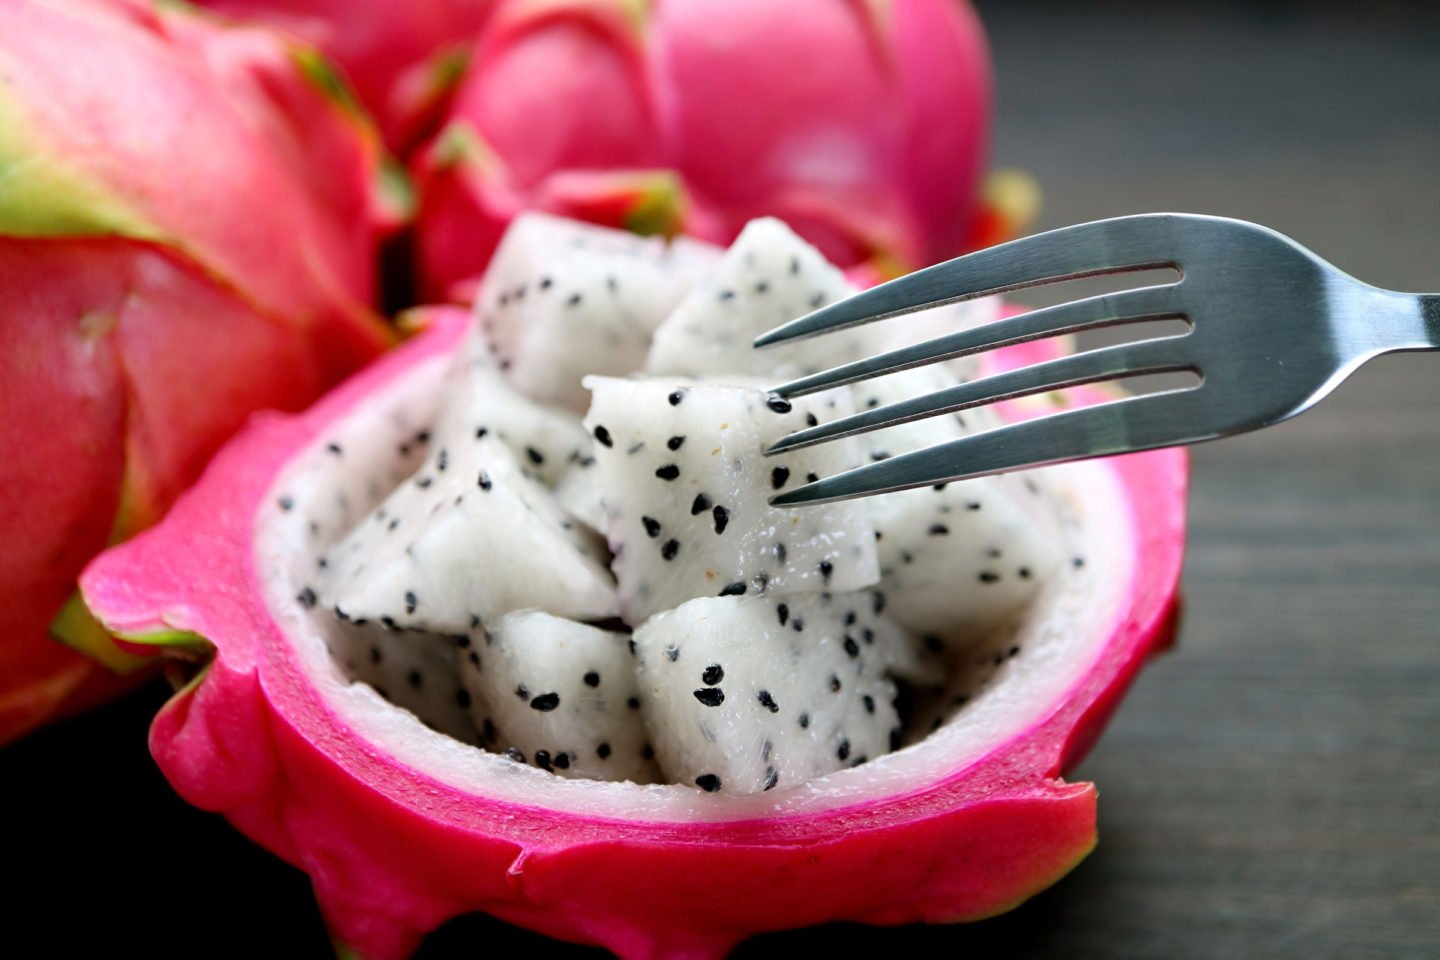 eating dragon fruit with fork